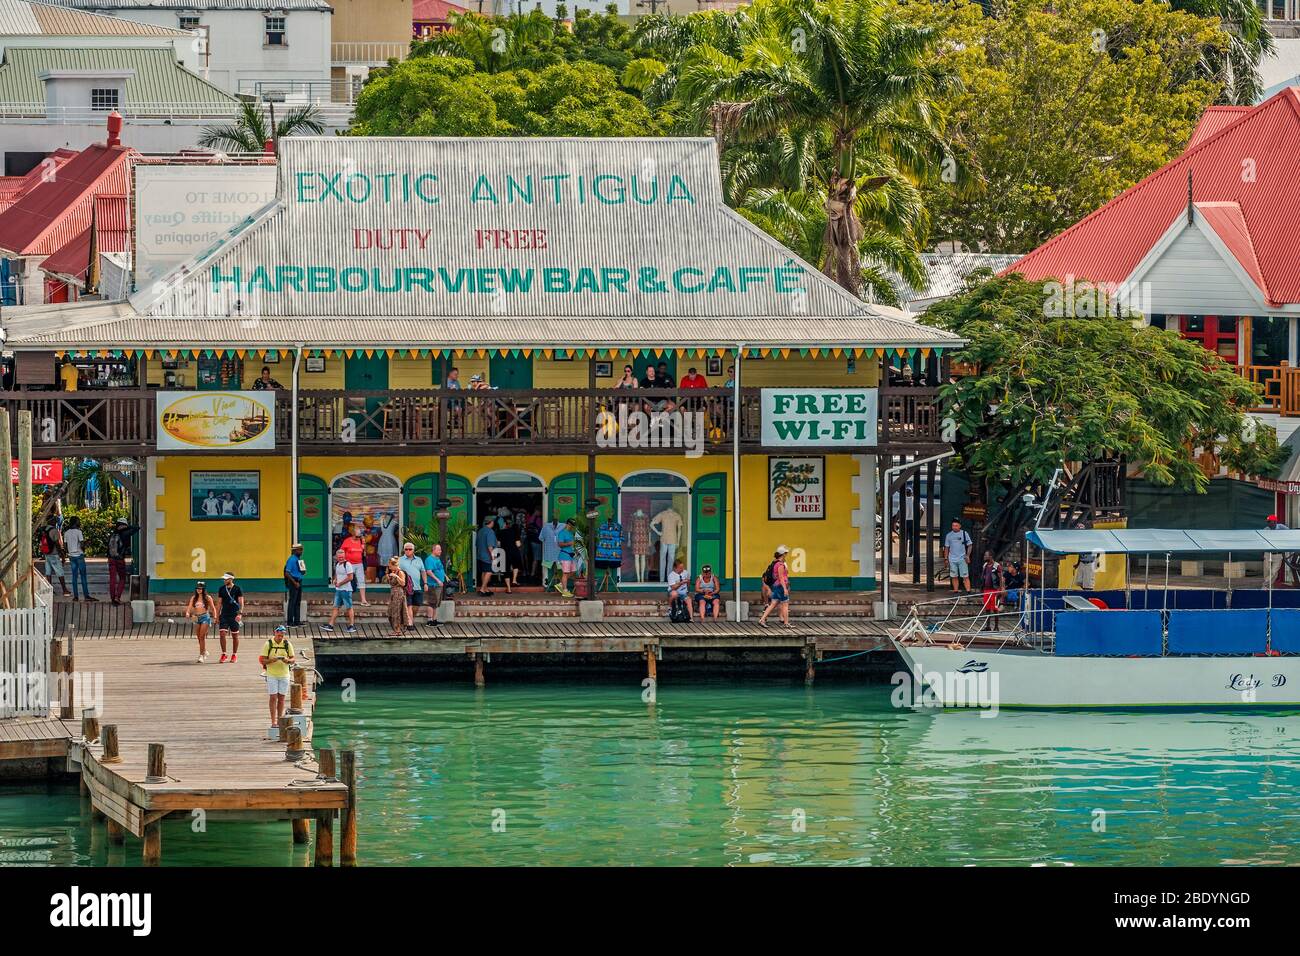 Shops Aong The Waterfront, St Johns, Antigua, West Indies Stock Photo